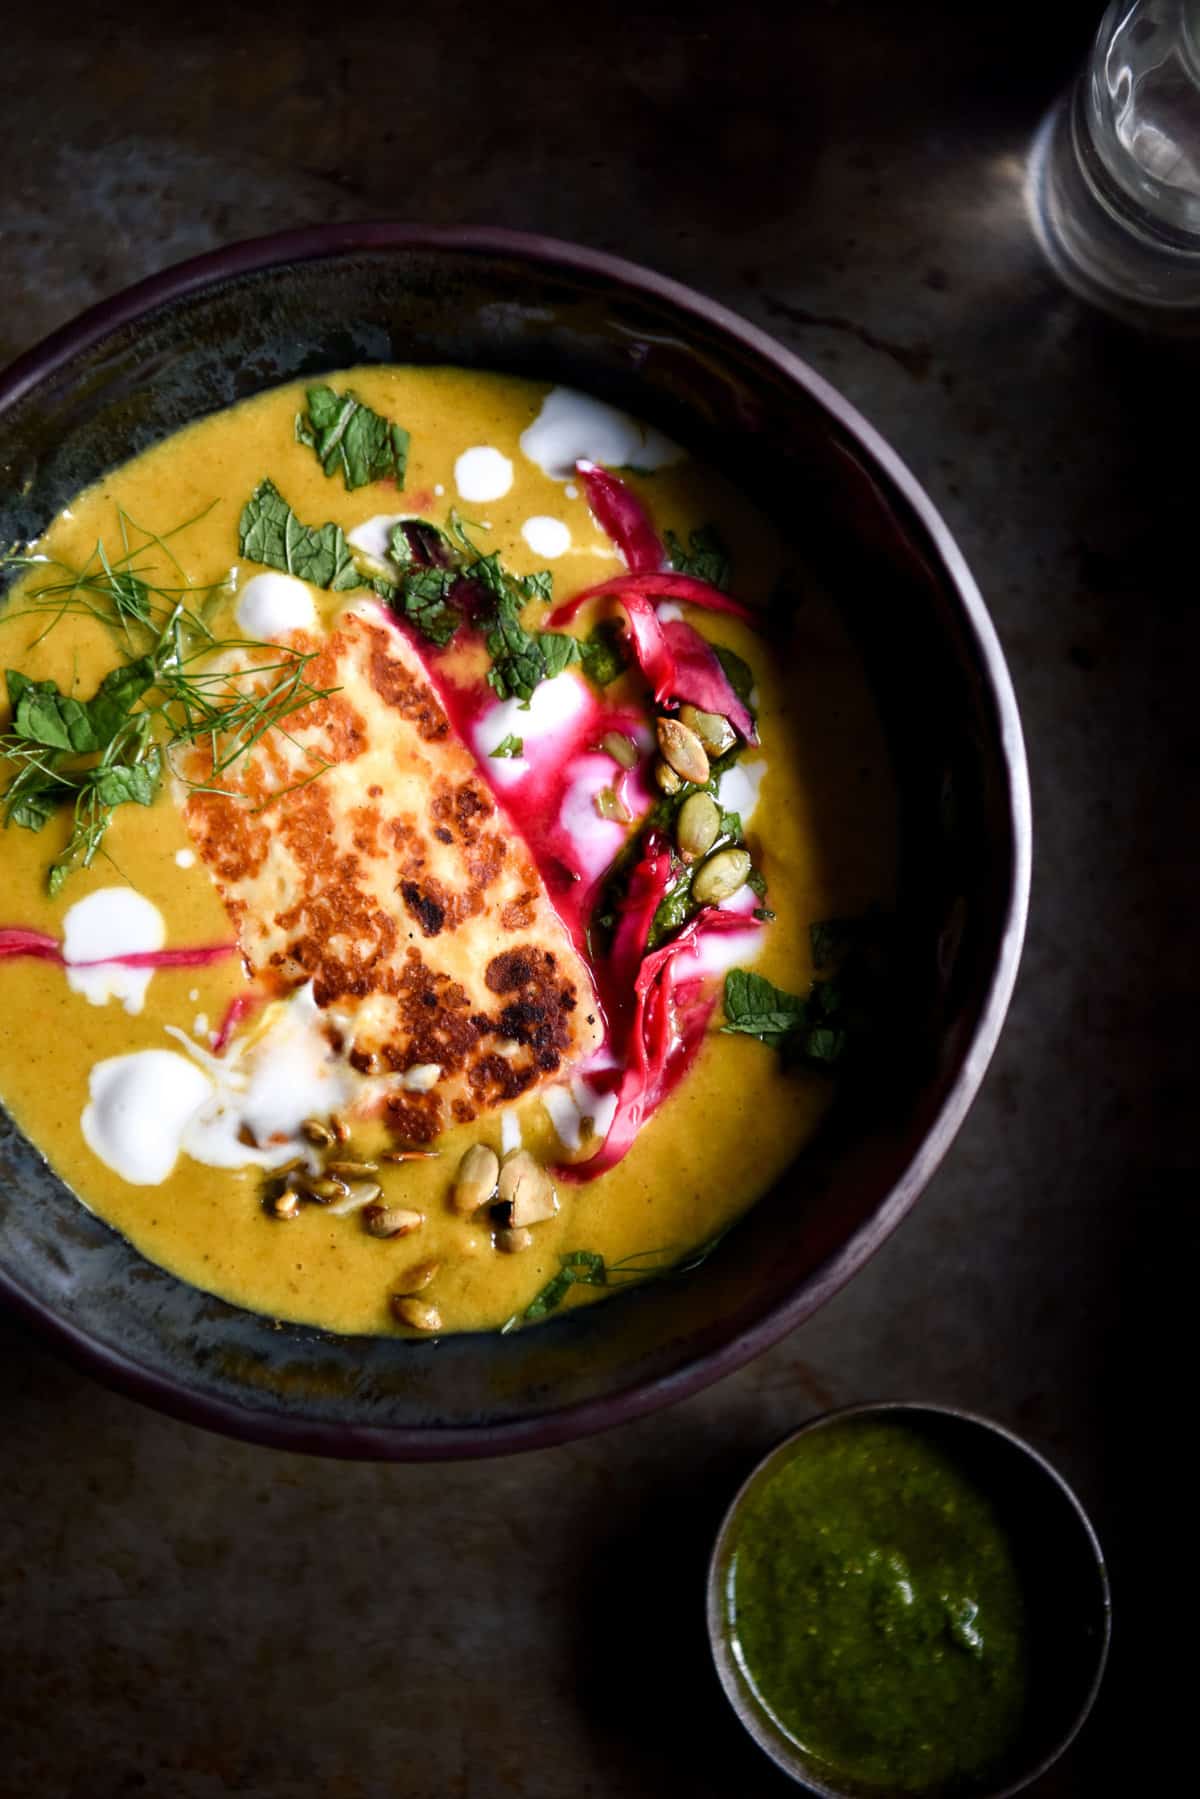 Moroccan spiced pumpkin soup in a dark grey ceramic bowl atop a dark grey metal backdrop. The soup is topped with a piece of fried haloumi, pickled cabbage, herbs, cream and pepitas.